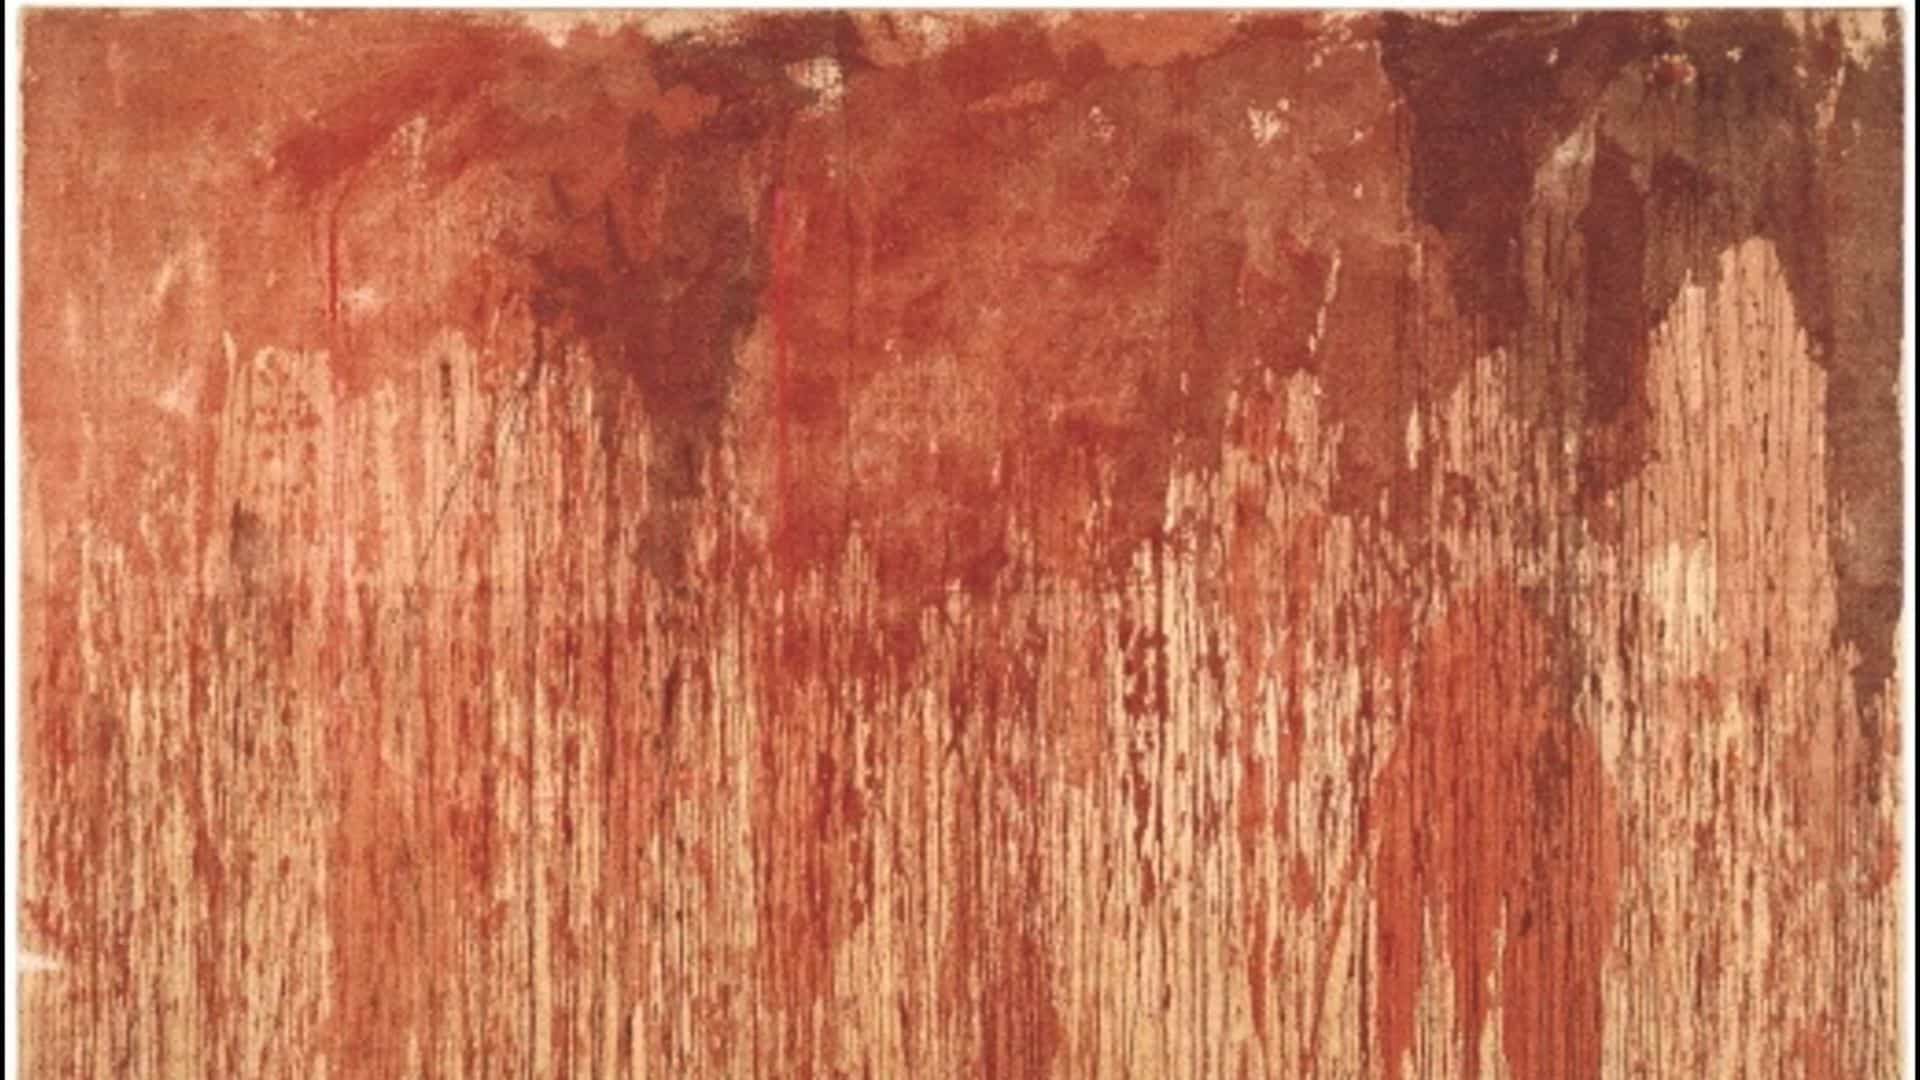 violence catharsis nitsch ece